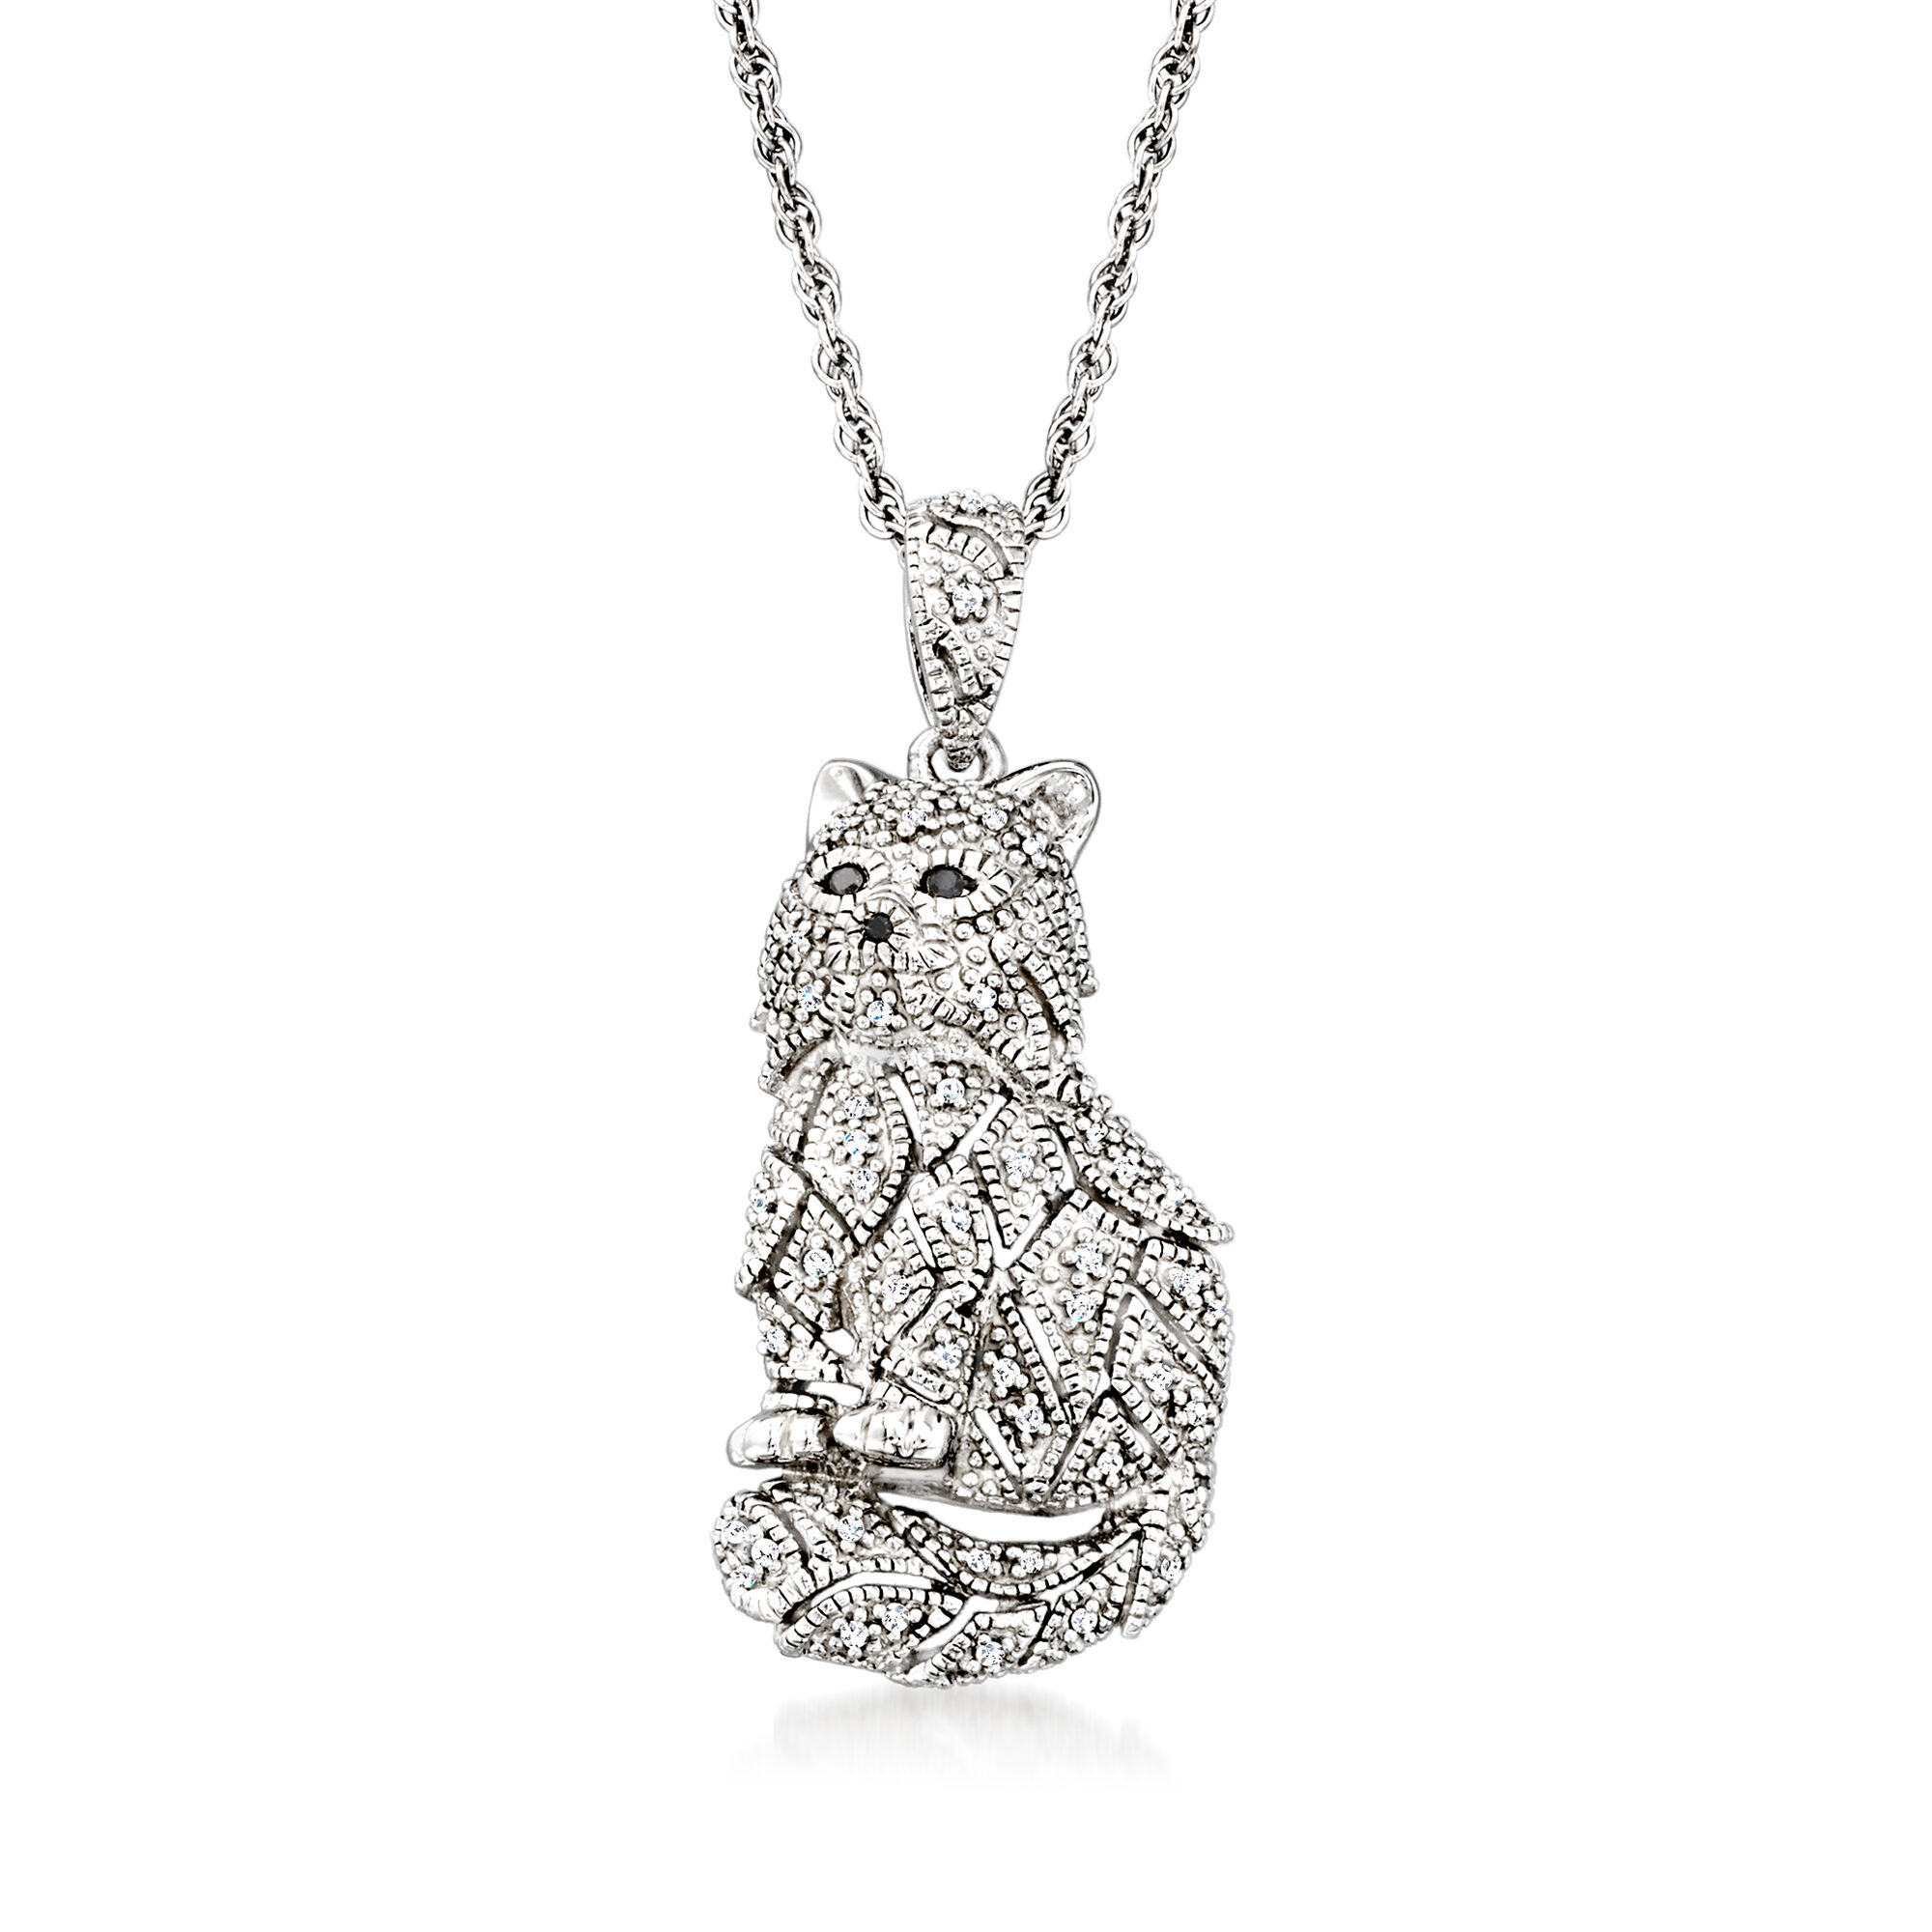 15 ct. t.w. Black and White Diamond Cat Pendant Necklace in 